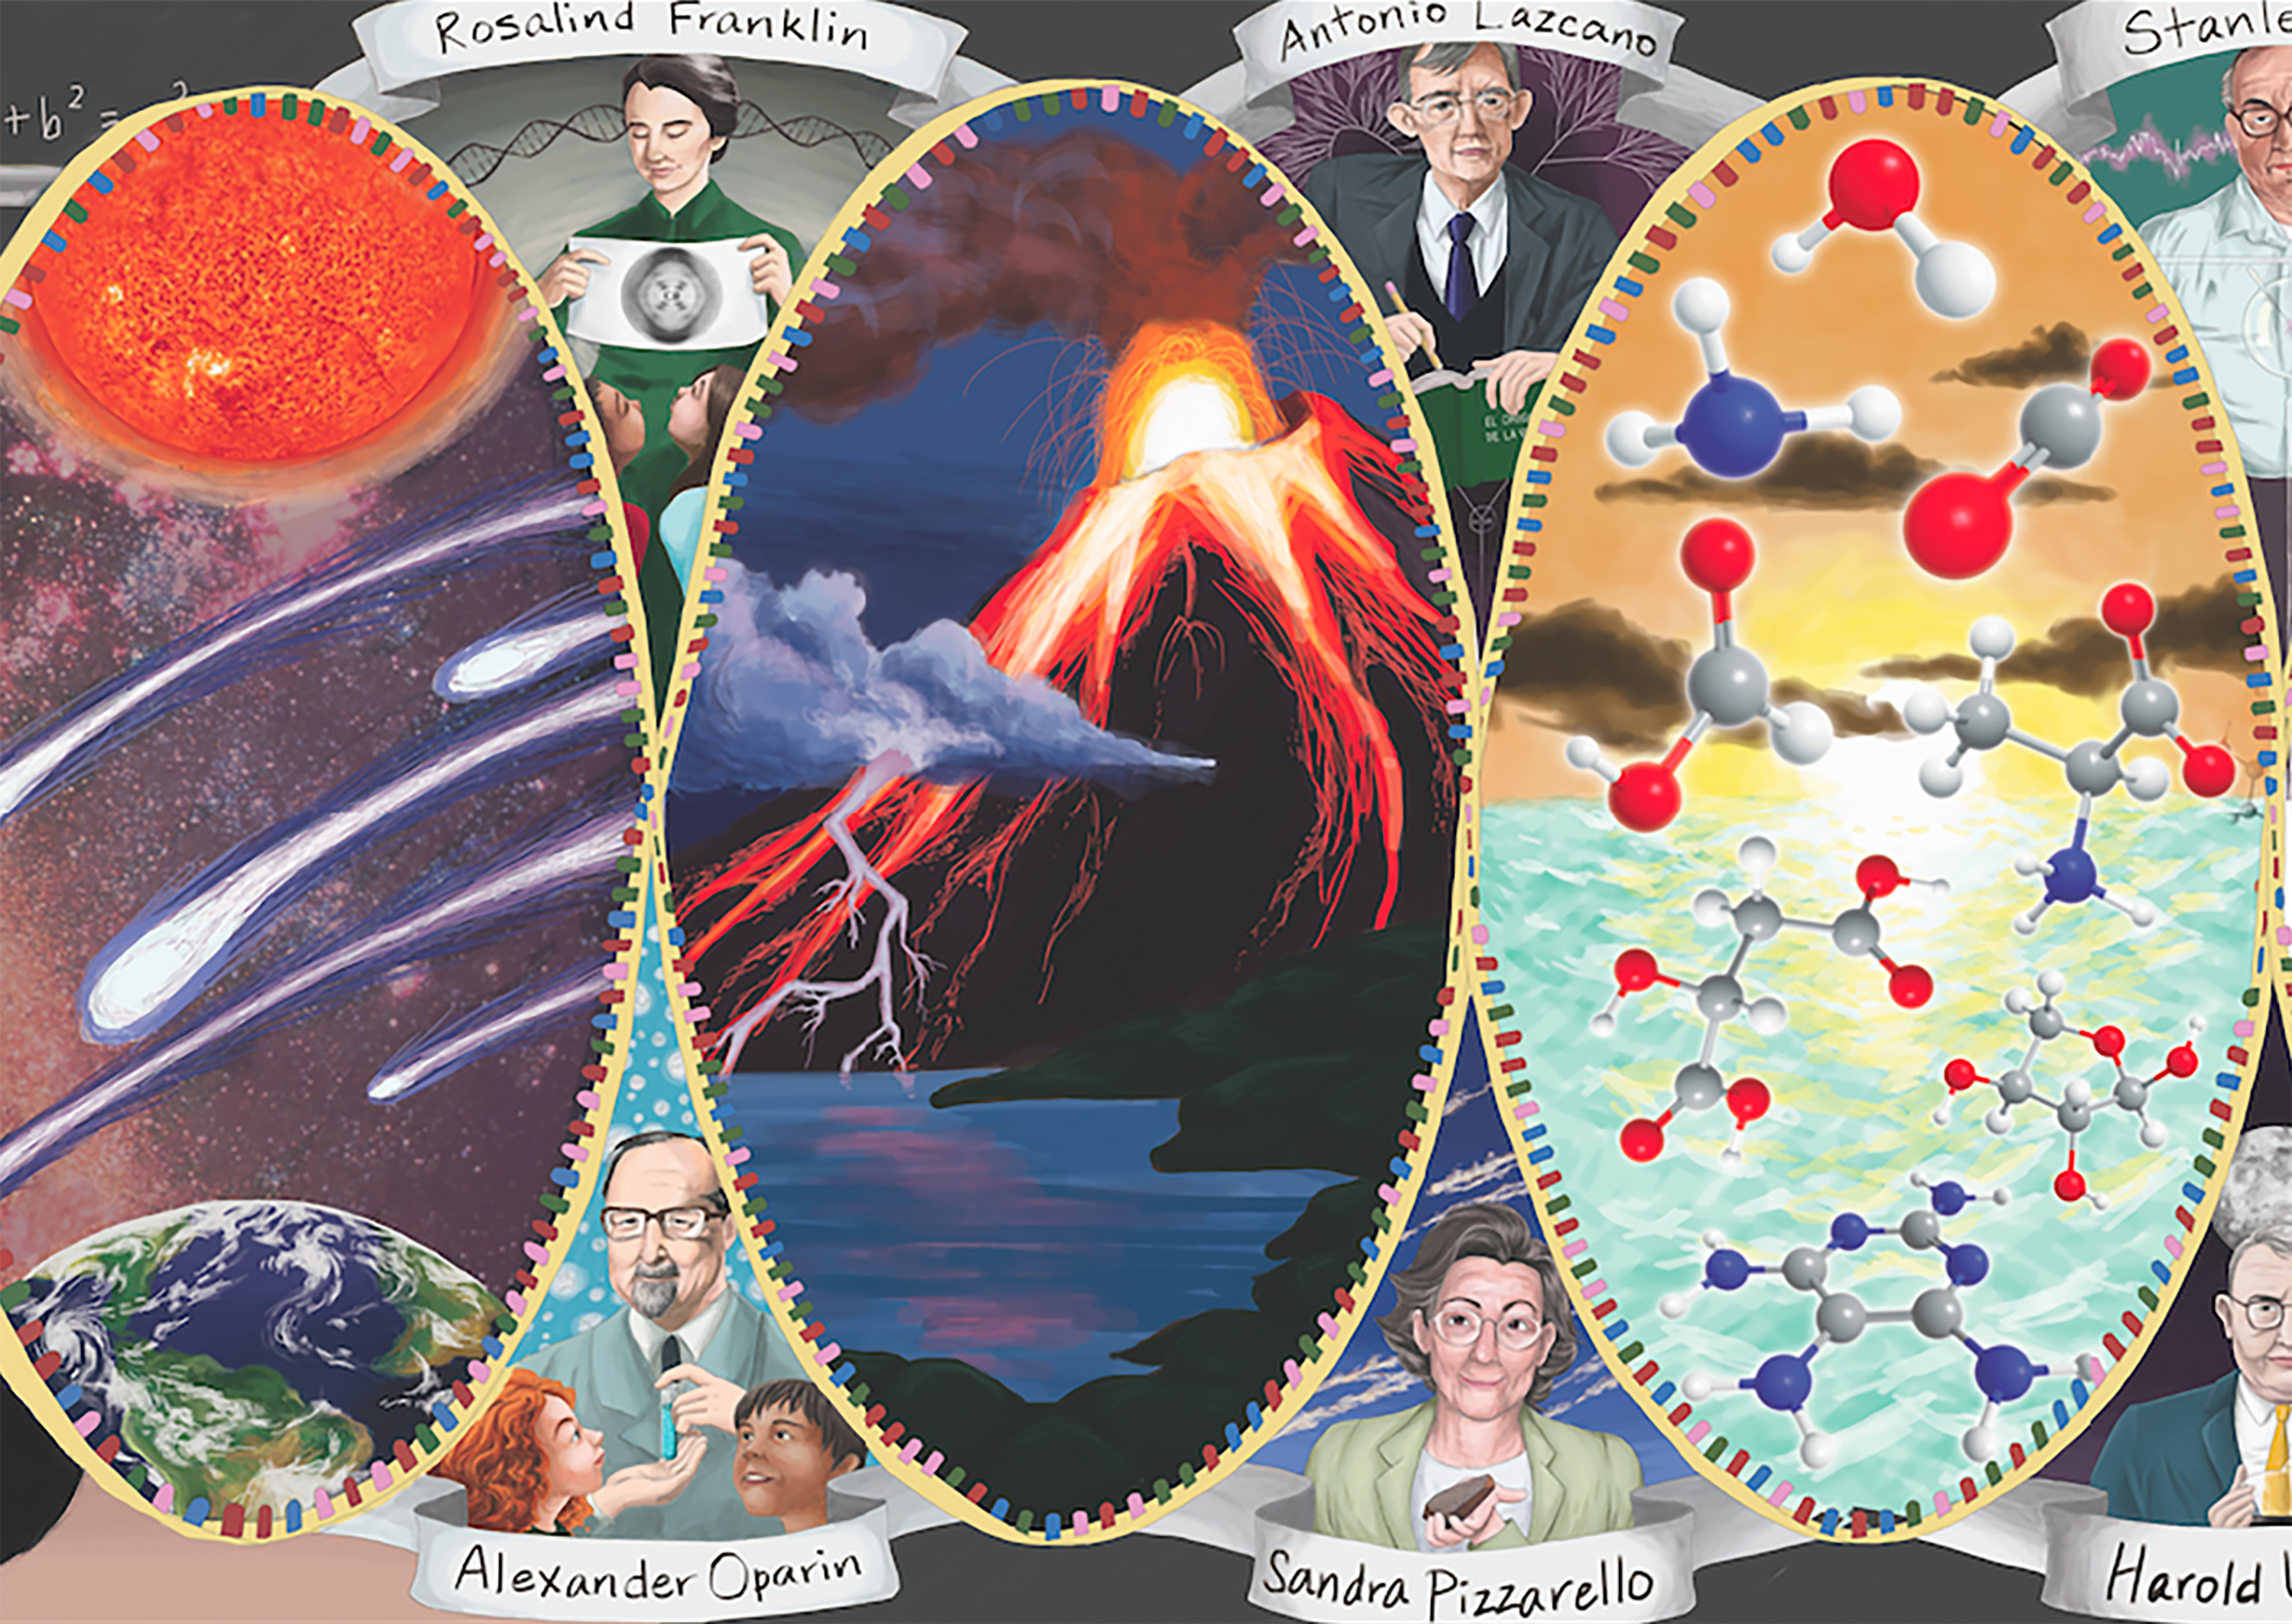 An outtake from a mural on the origin of life celebrates famous experimental milestones in the science that tries to explain how chemicals evolved into the first building blocks of life on an Earth before life existed. The NSF Center for Chemical Evolution headquartered at Georgia Tech has adopted this banner as a symbol. Credit: Painted by Christine He and David Fialho for Georgia Tech